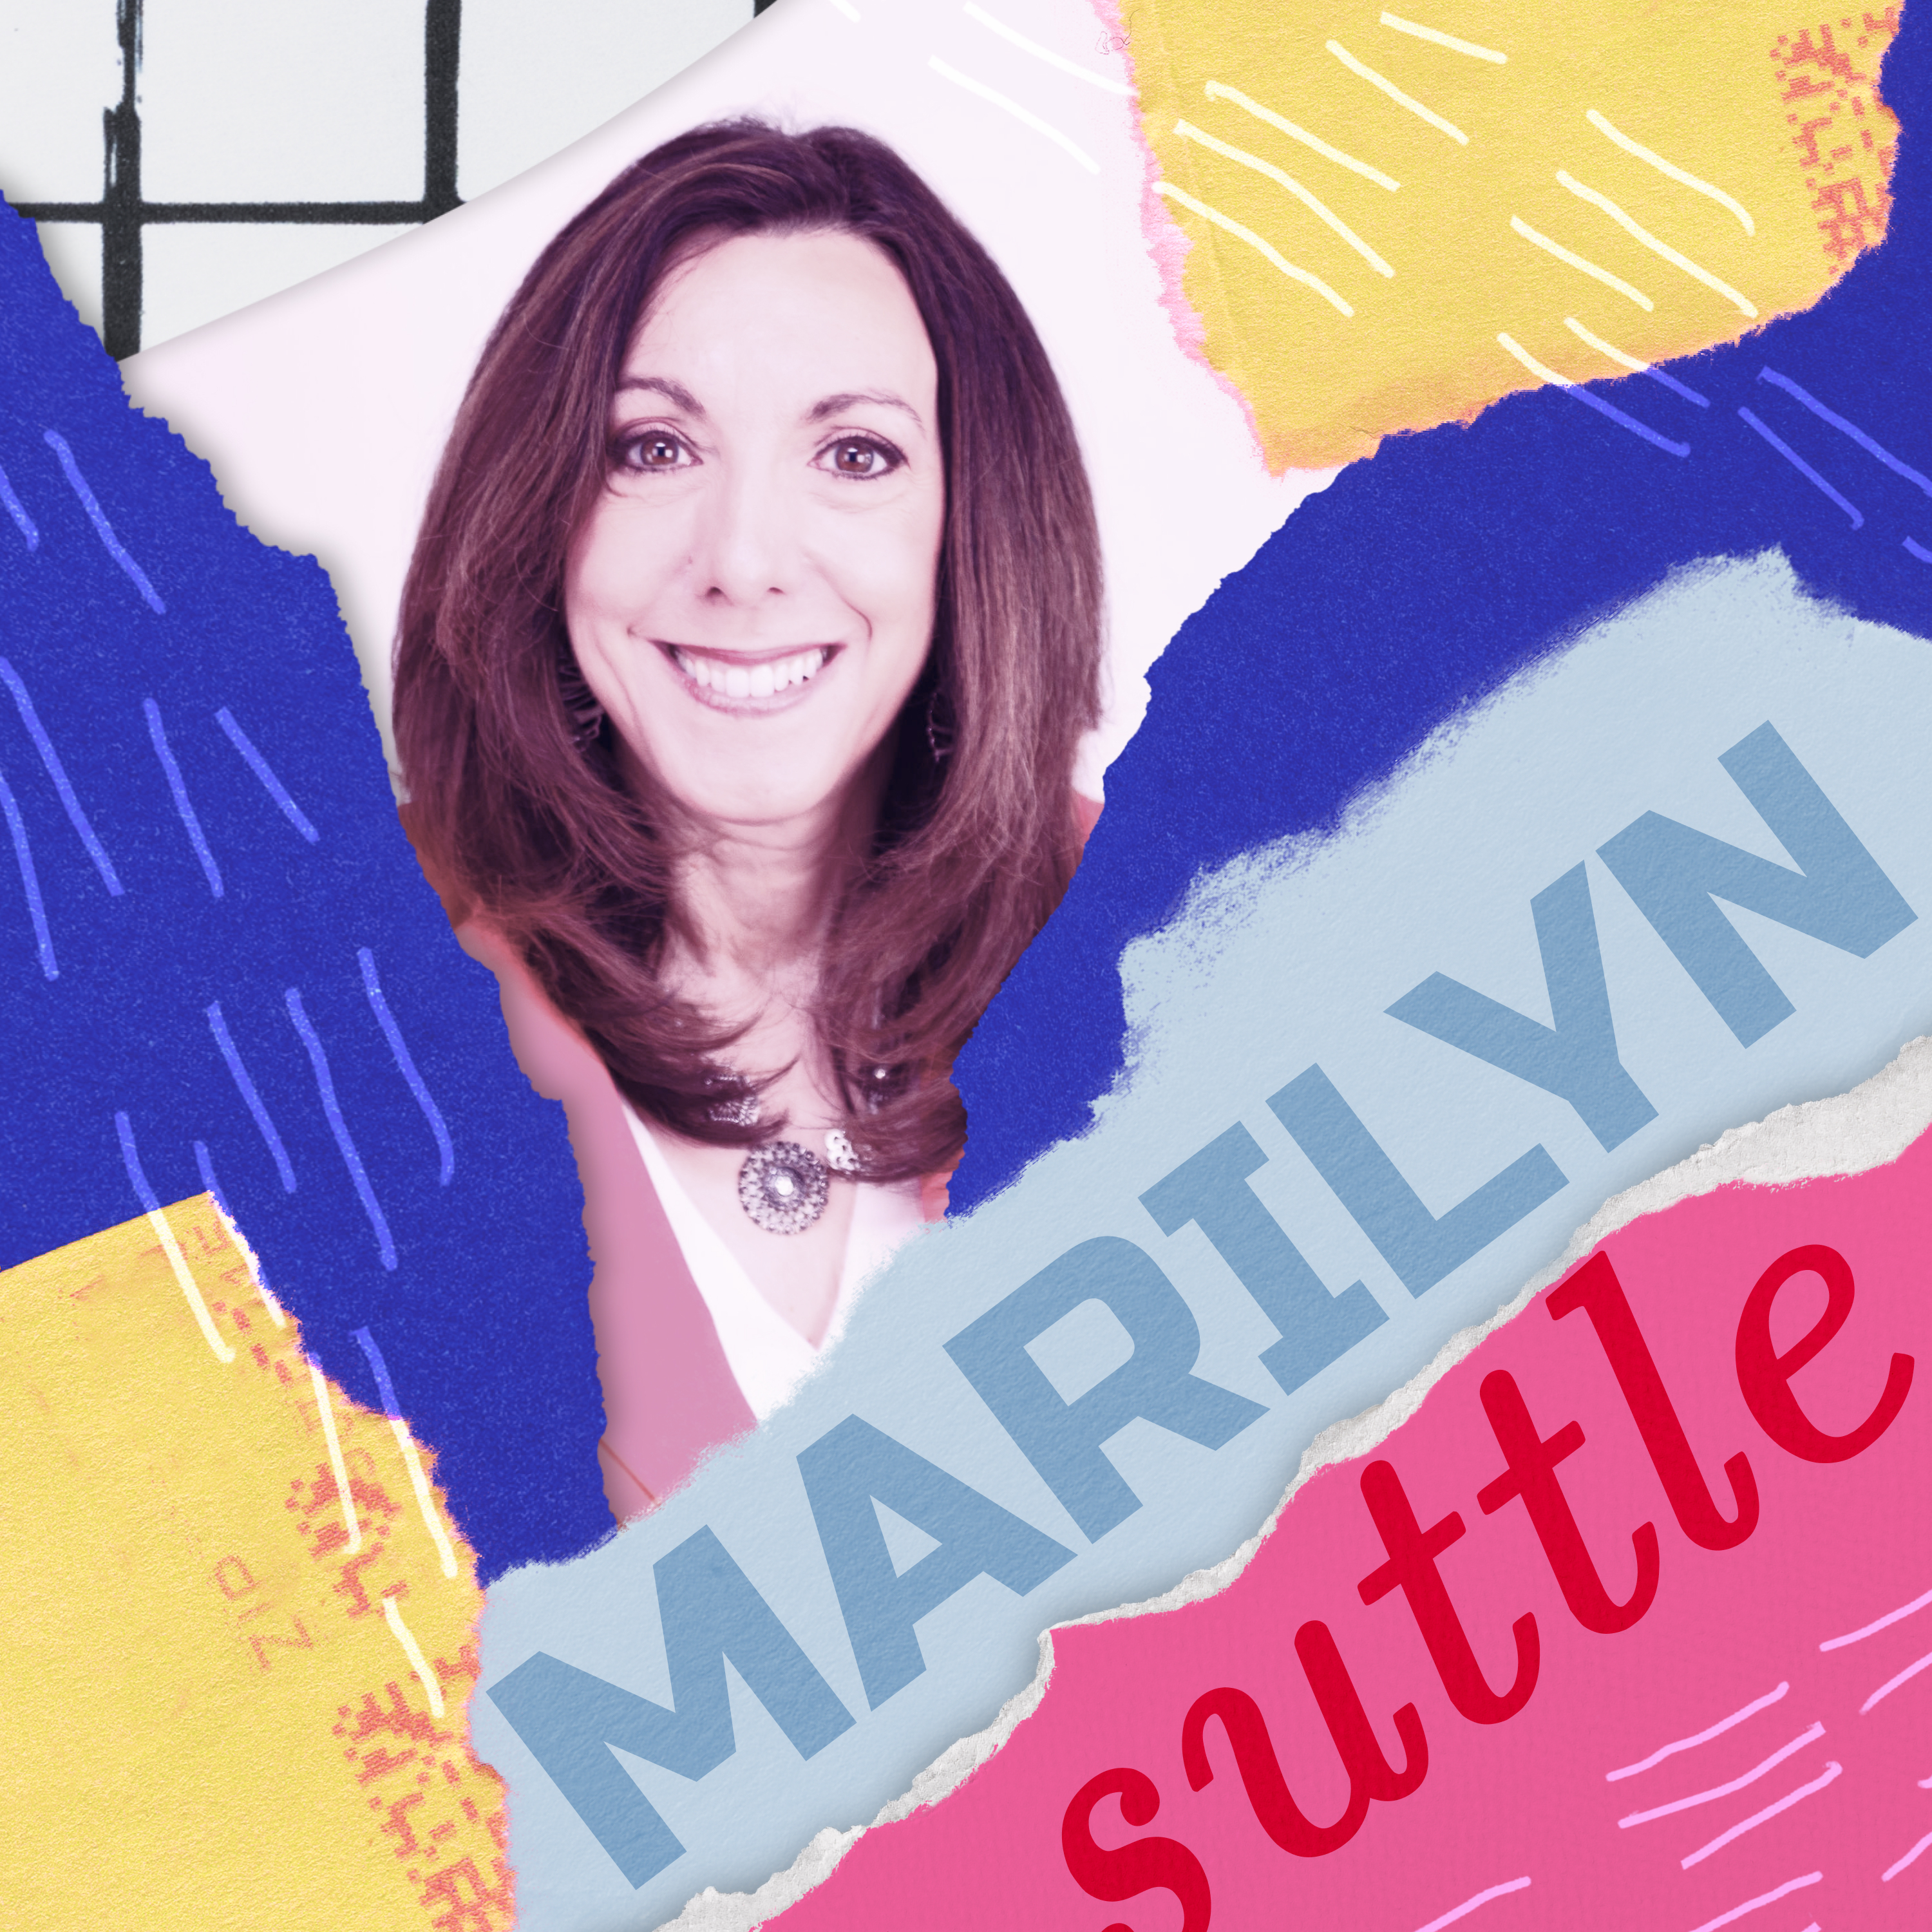 Wellbeing coach Marilyn Suttle on curbing burnout and attrition